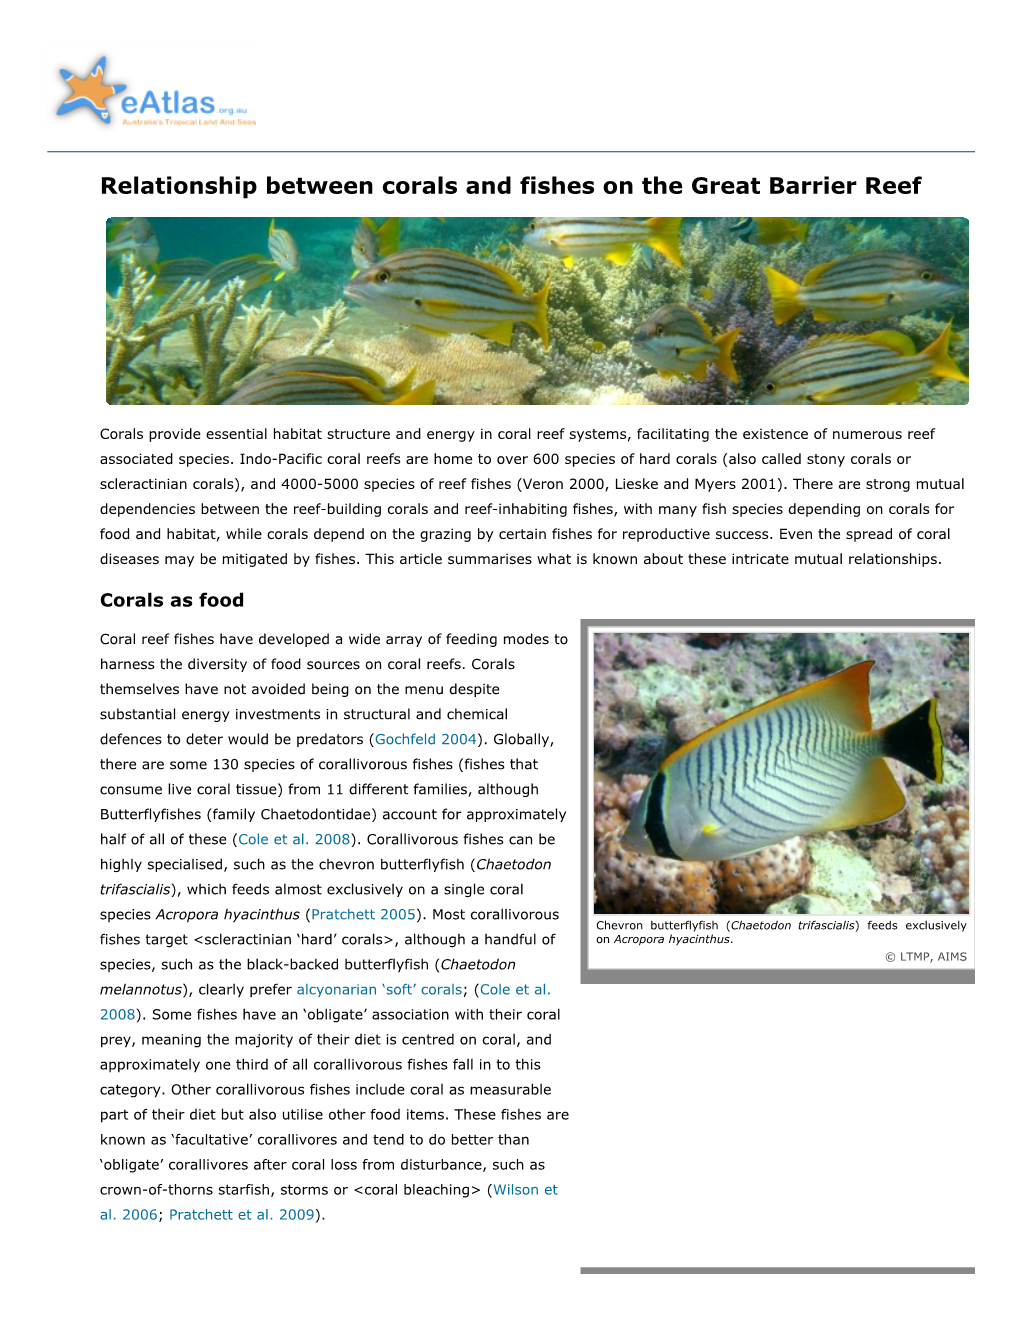 Relationship Between Corals and Fishes on the Great Barrier Reef